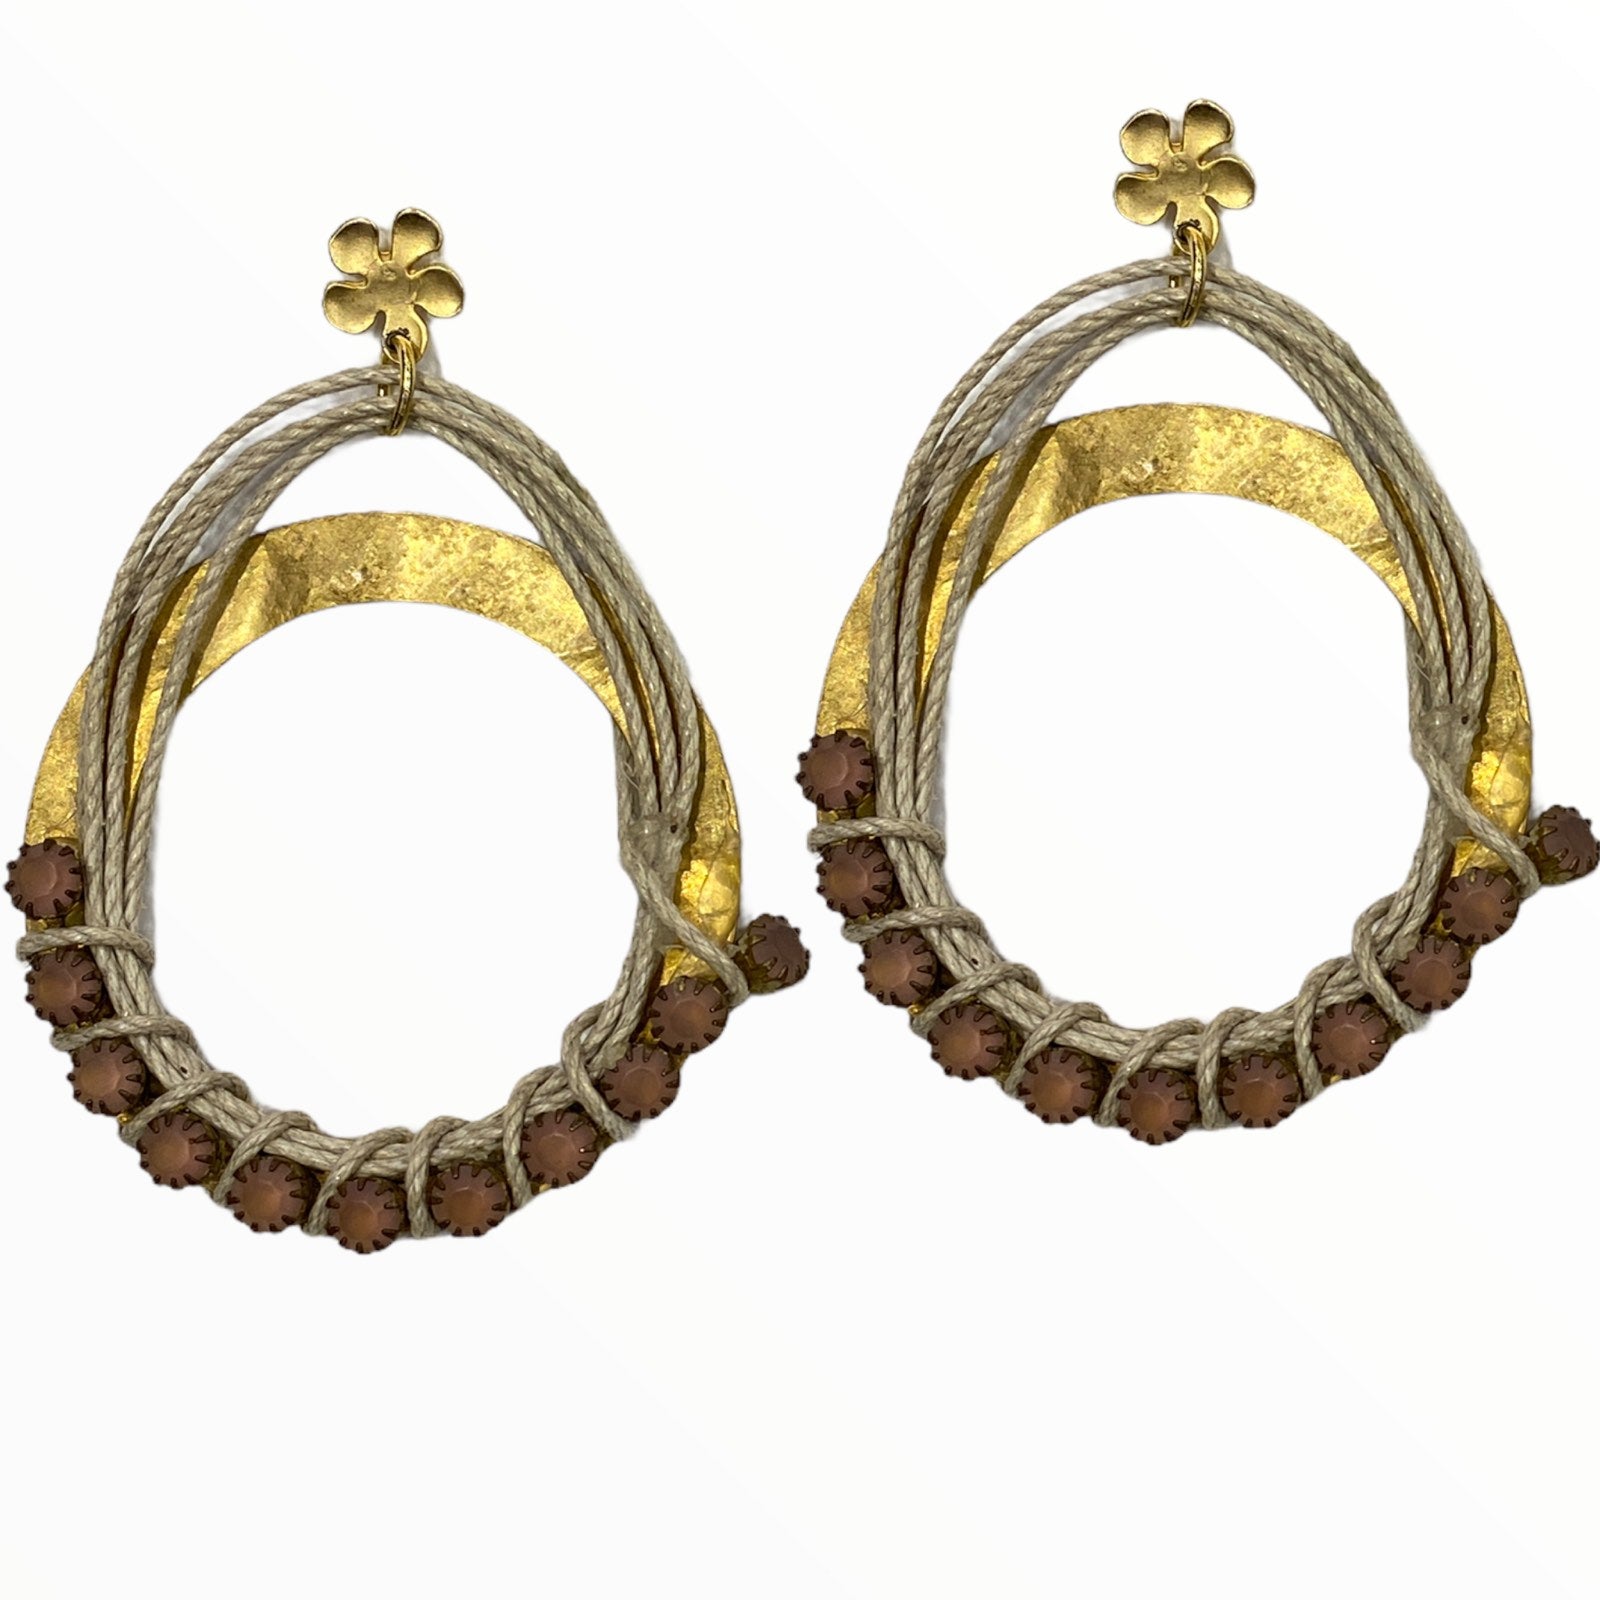 Gold chic earrings with stones